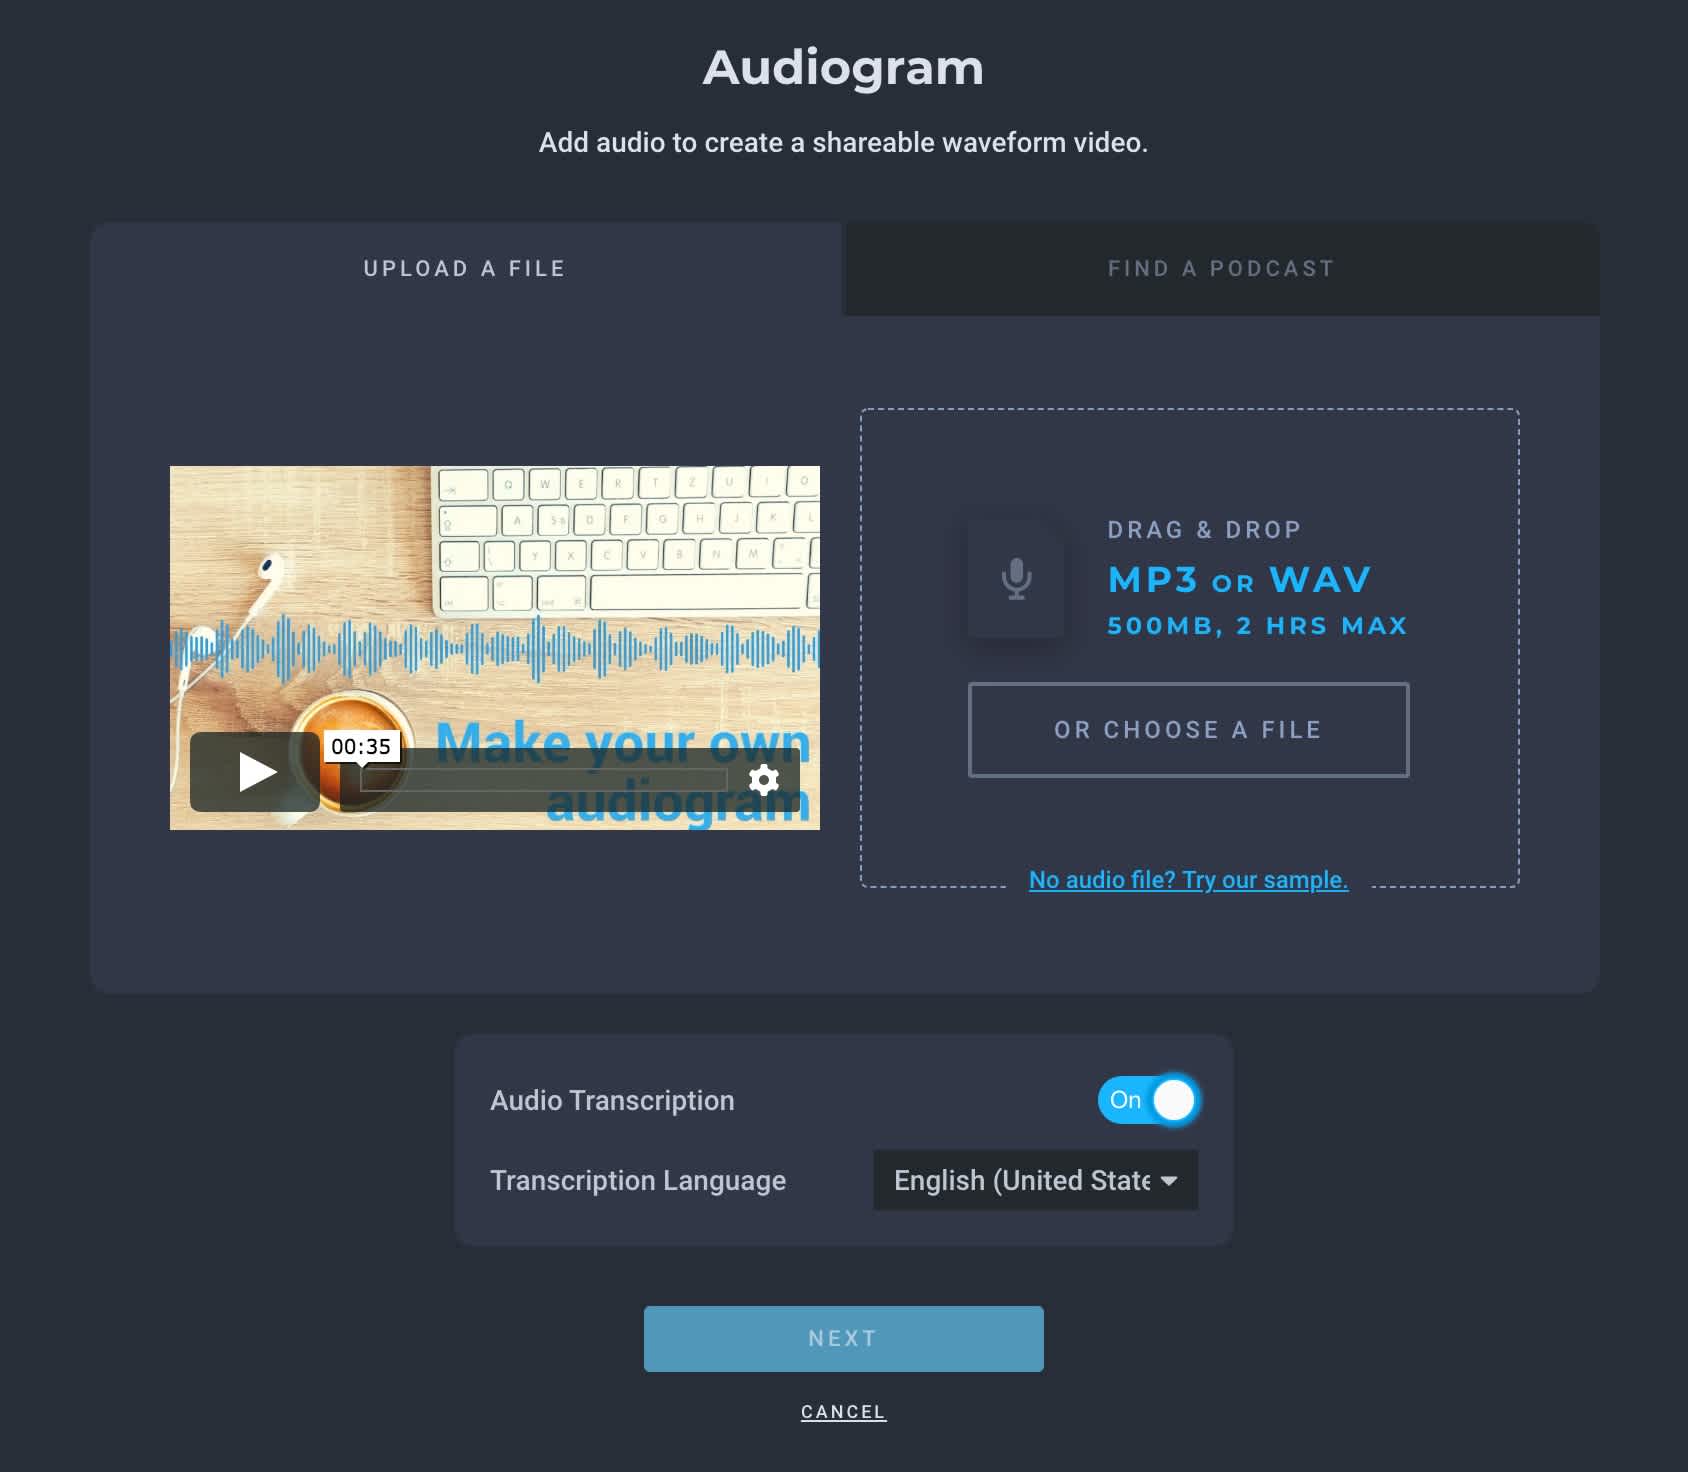 Open Headliner’s Audiogram Wizard and upload your podcast episode MP3 or WAV to create a video.